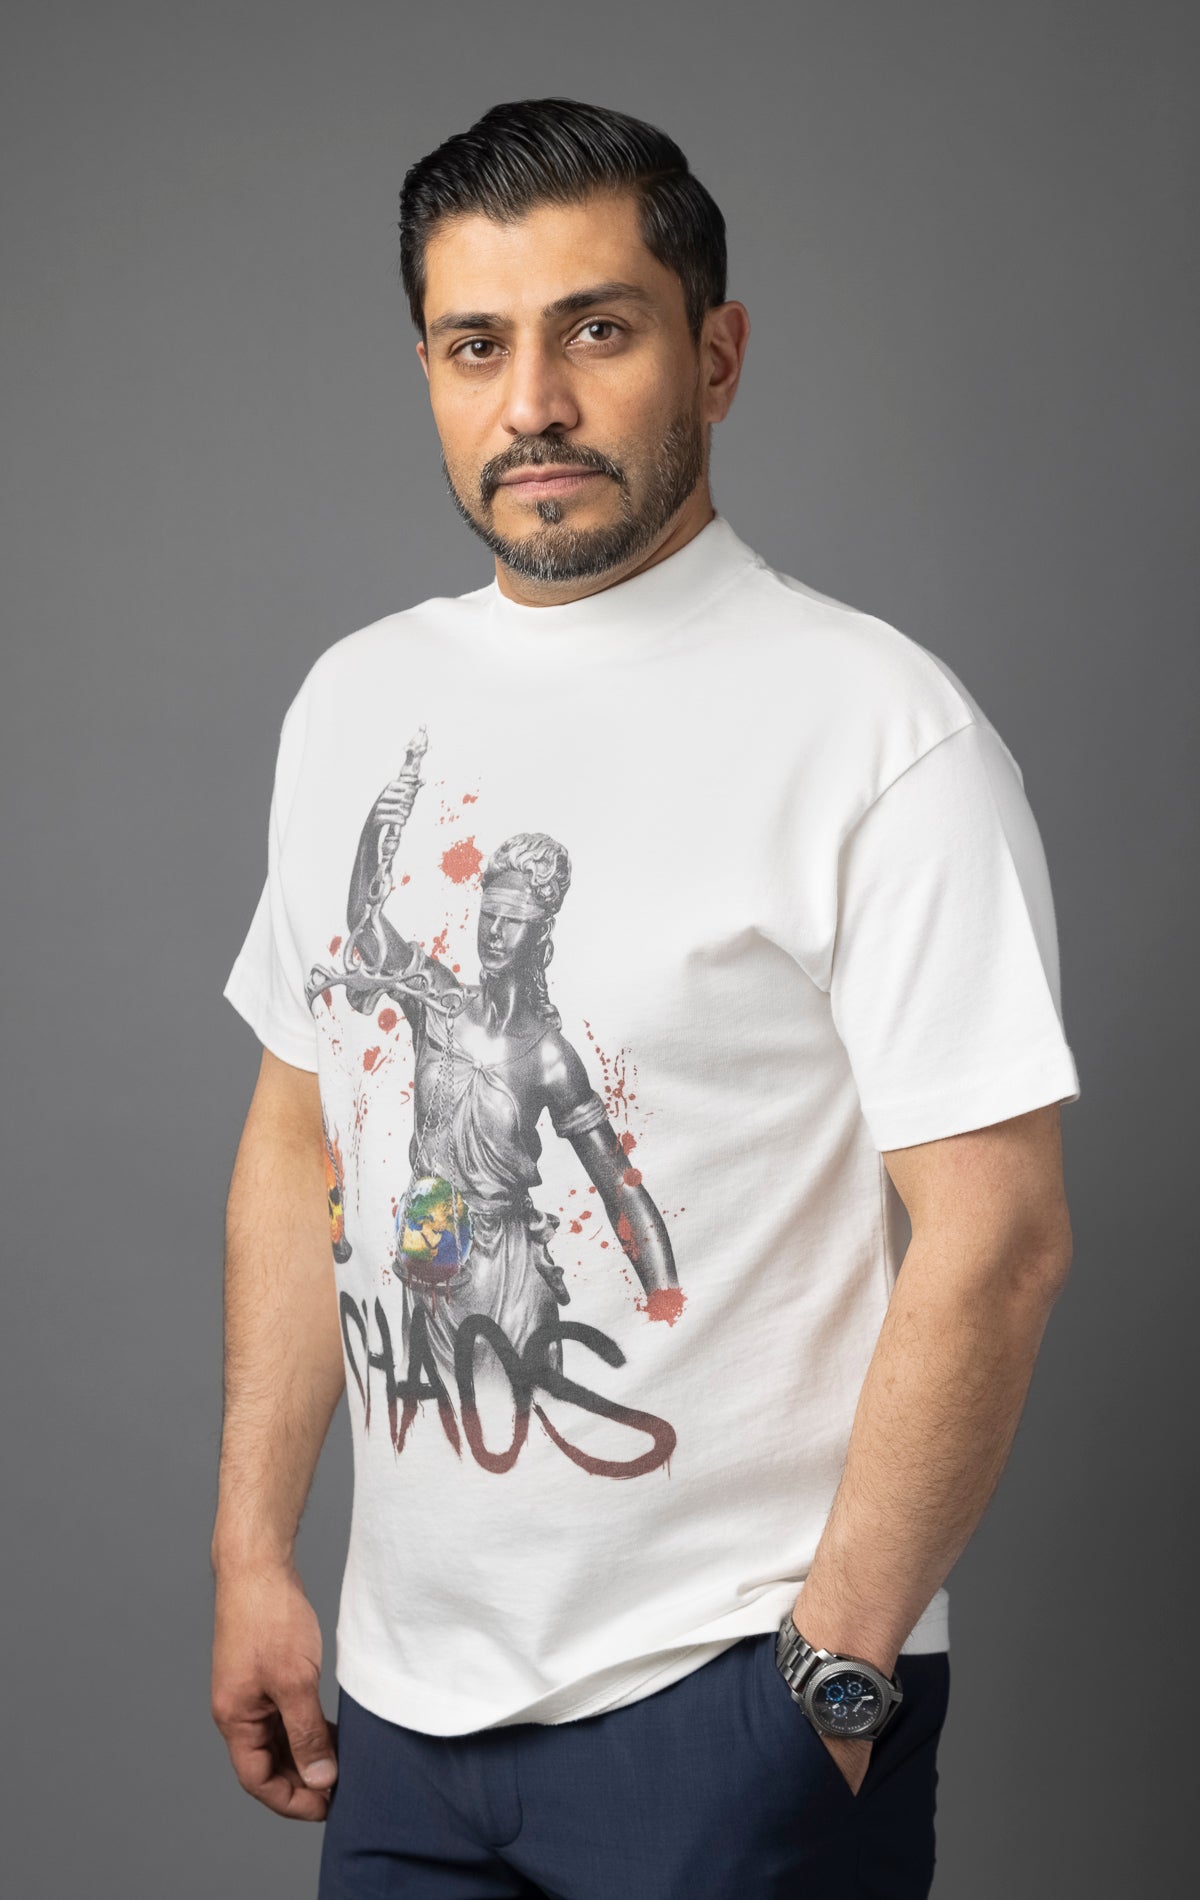 Chaos graphic t-shirt in white.